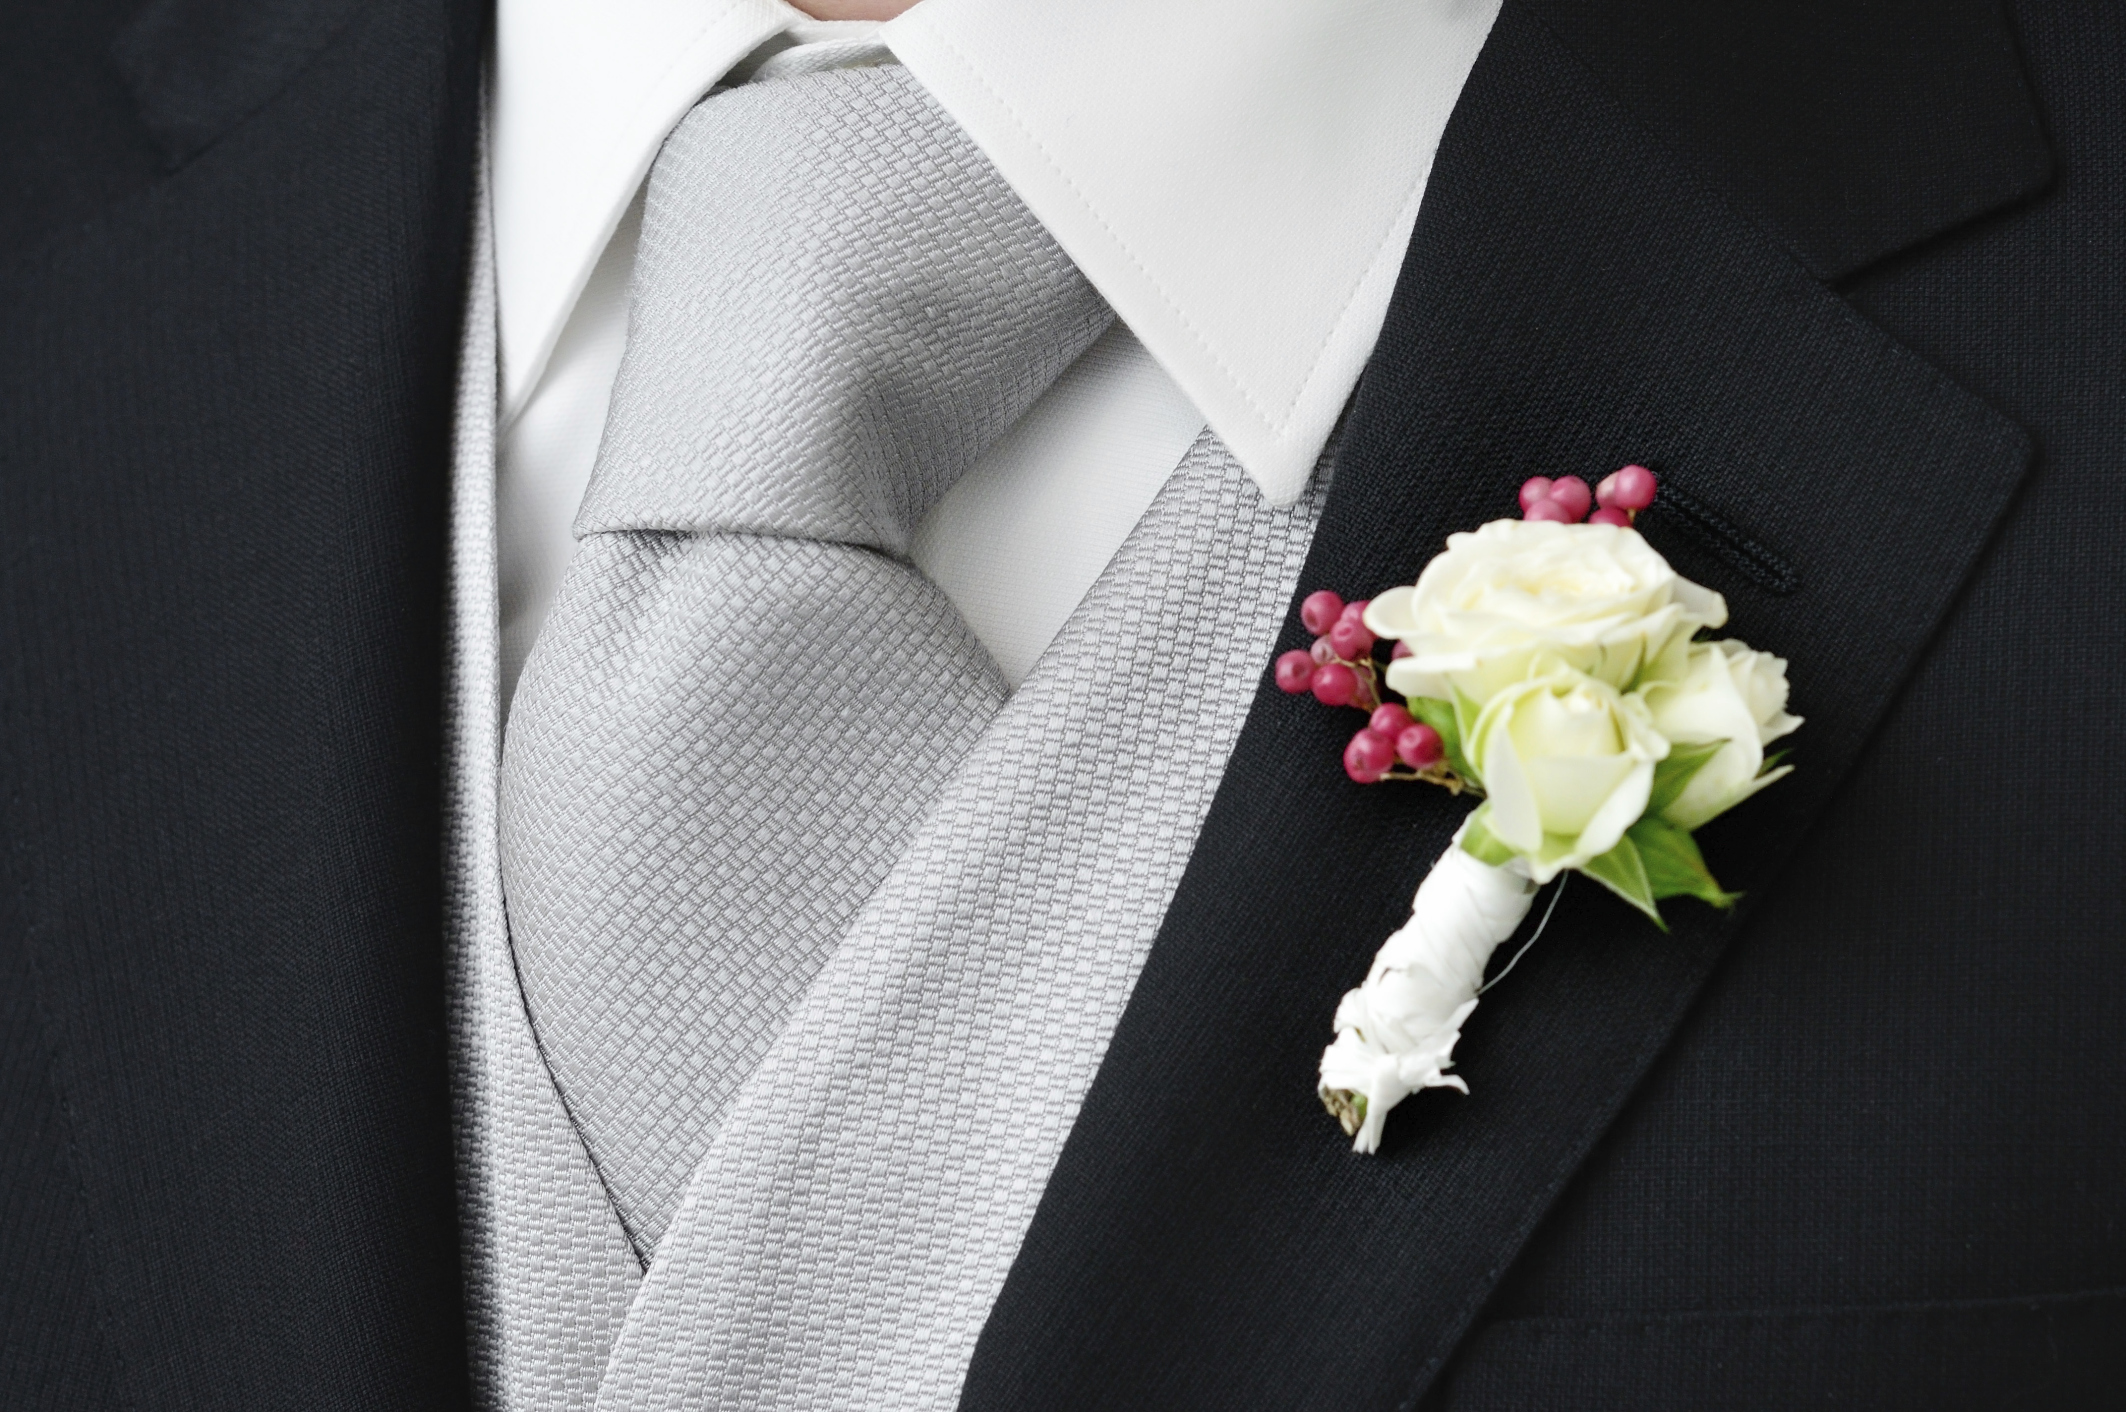 Wedding Accessories for the Groom